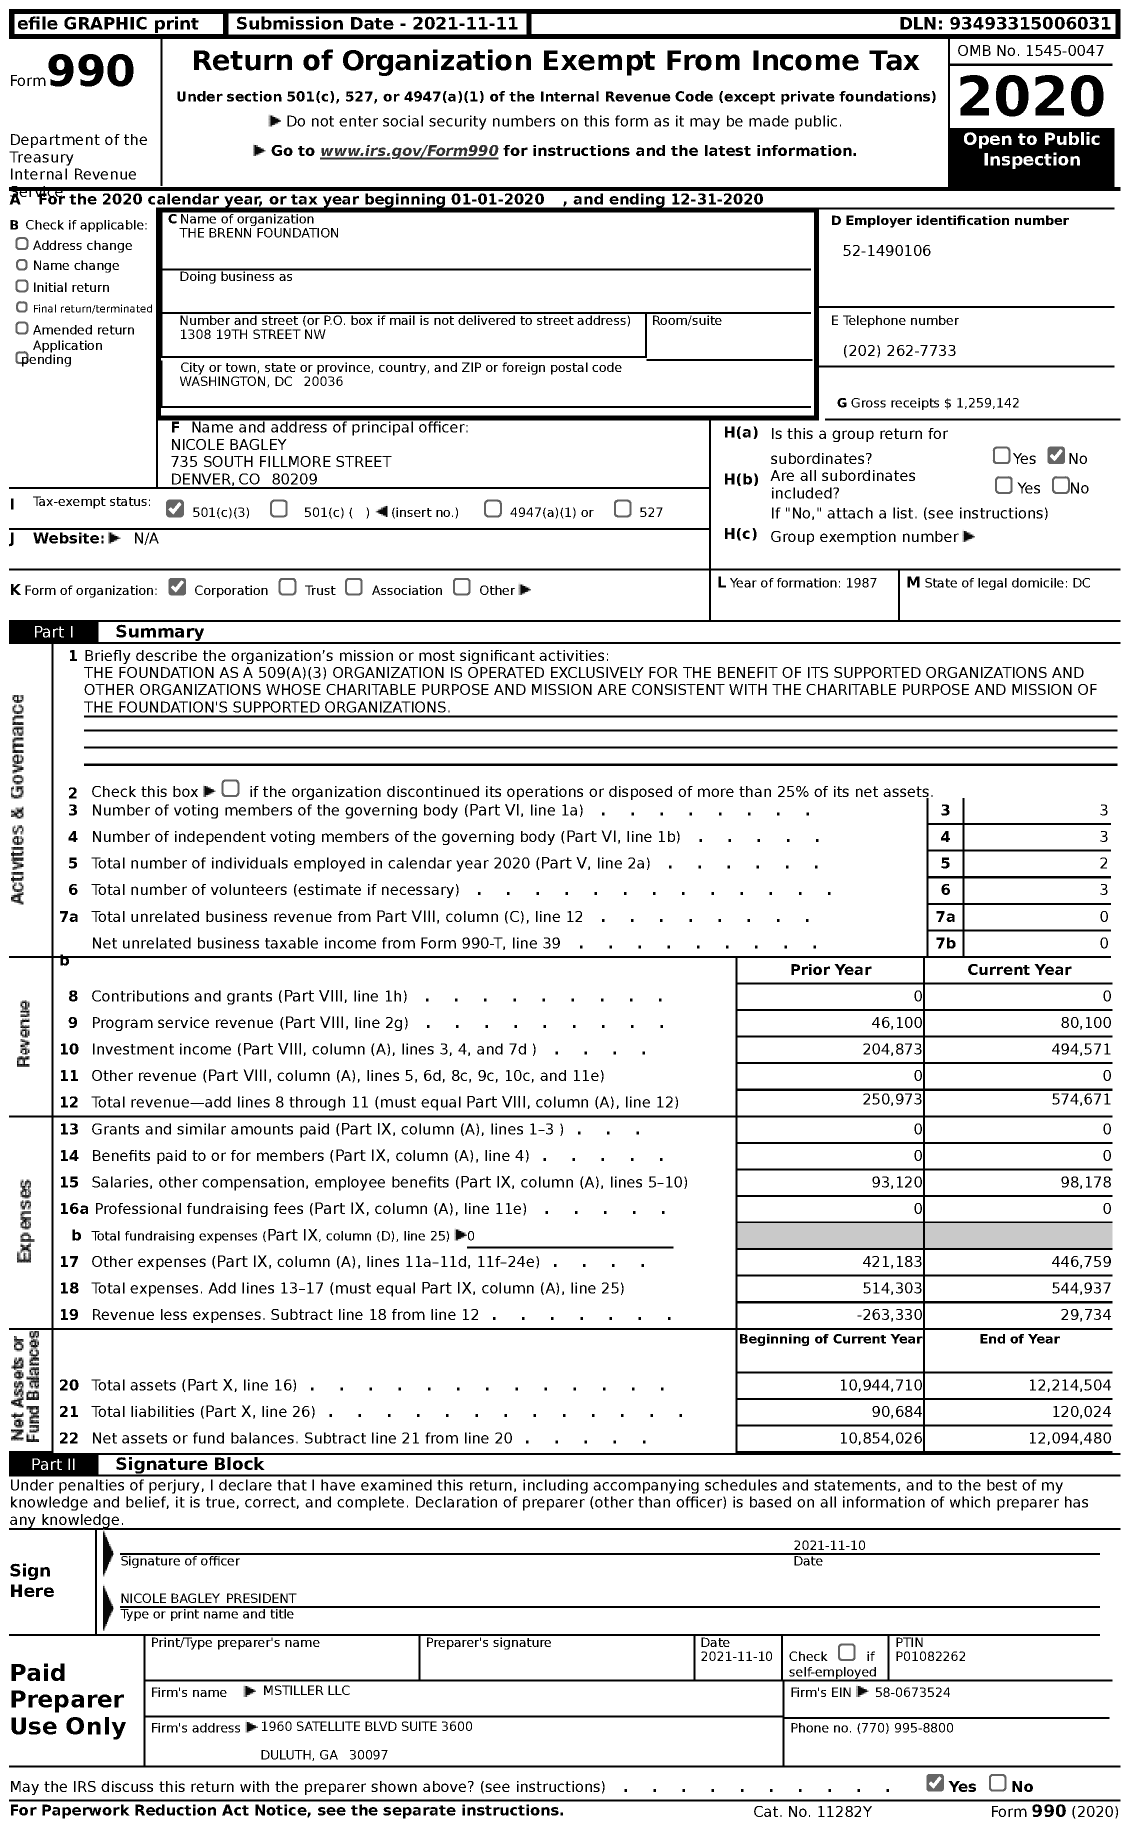 Image of first page of 2020 Form 990 for The Brenn Foundation